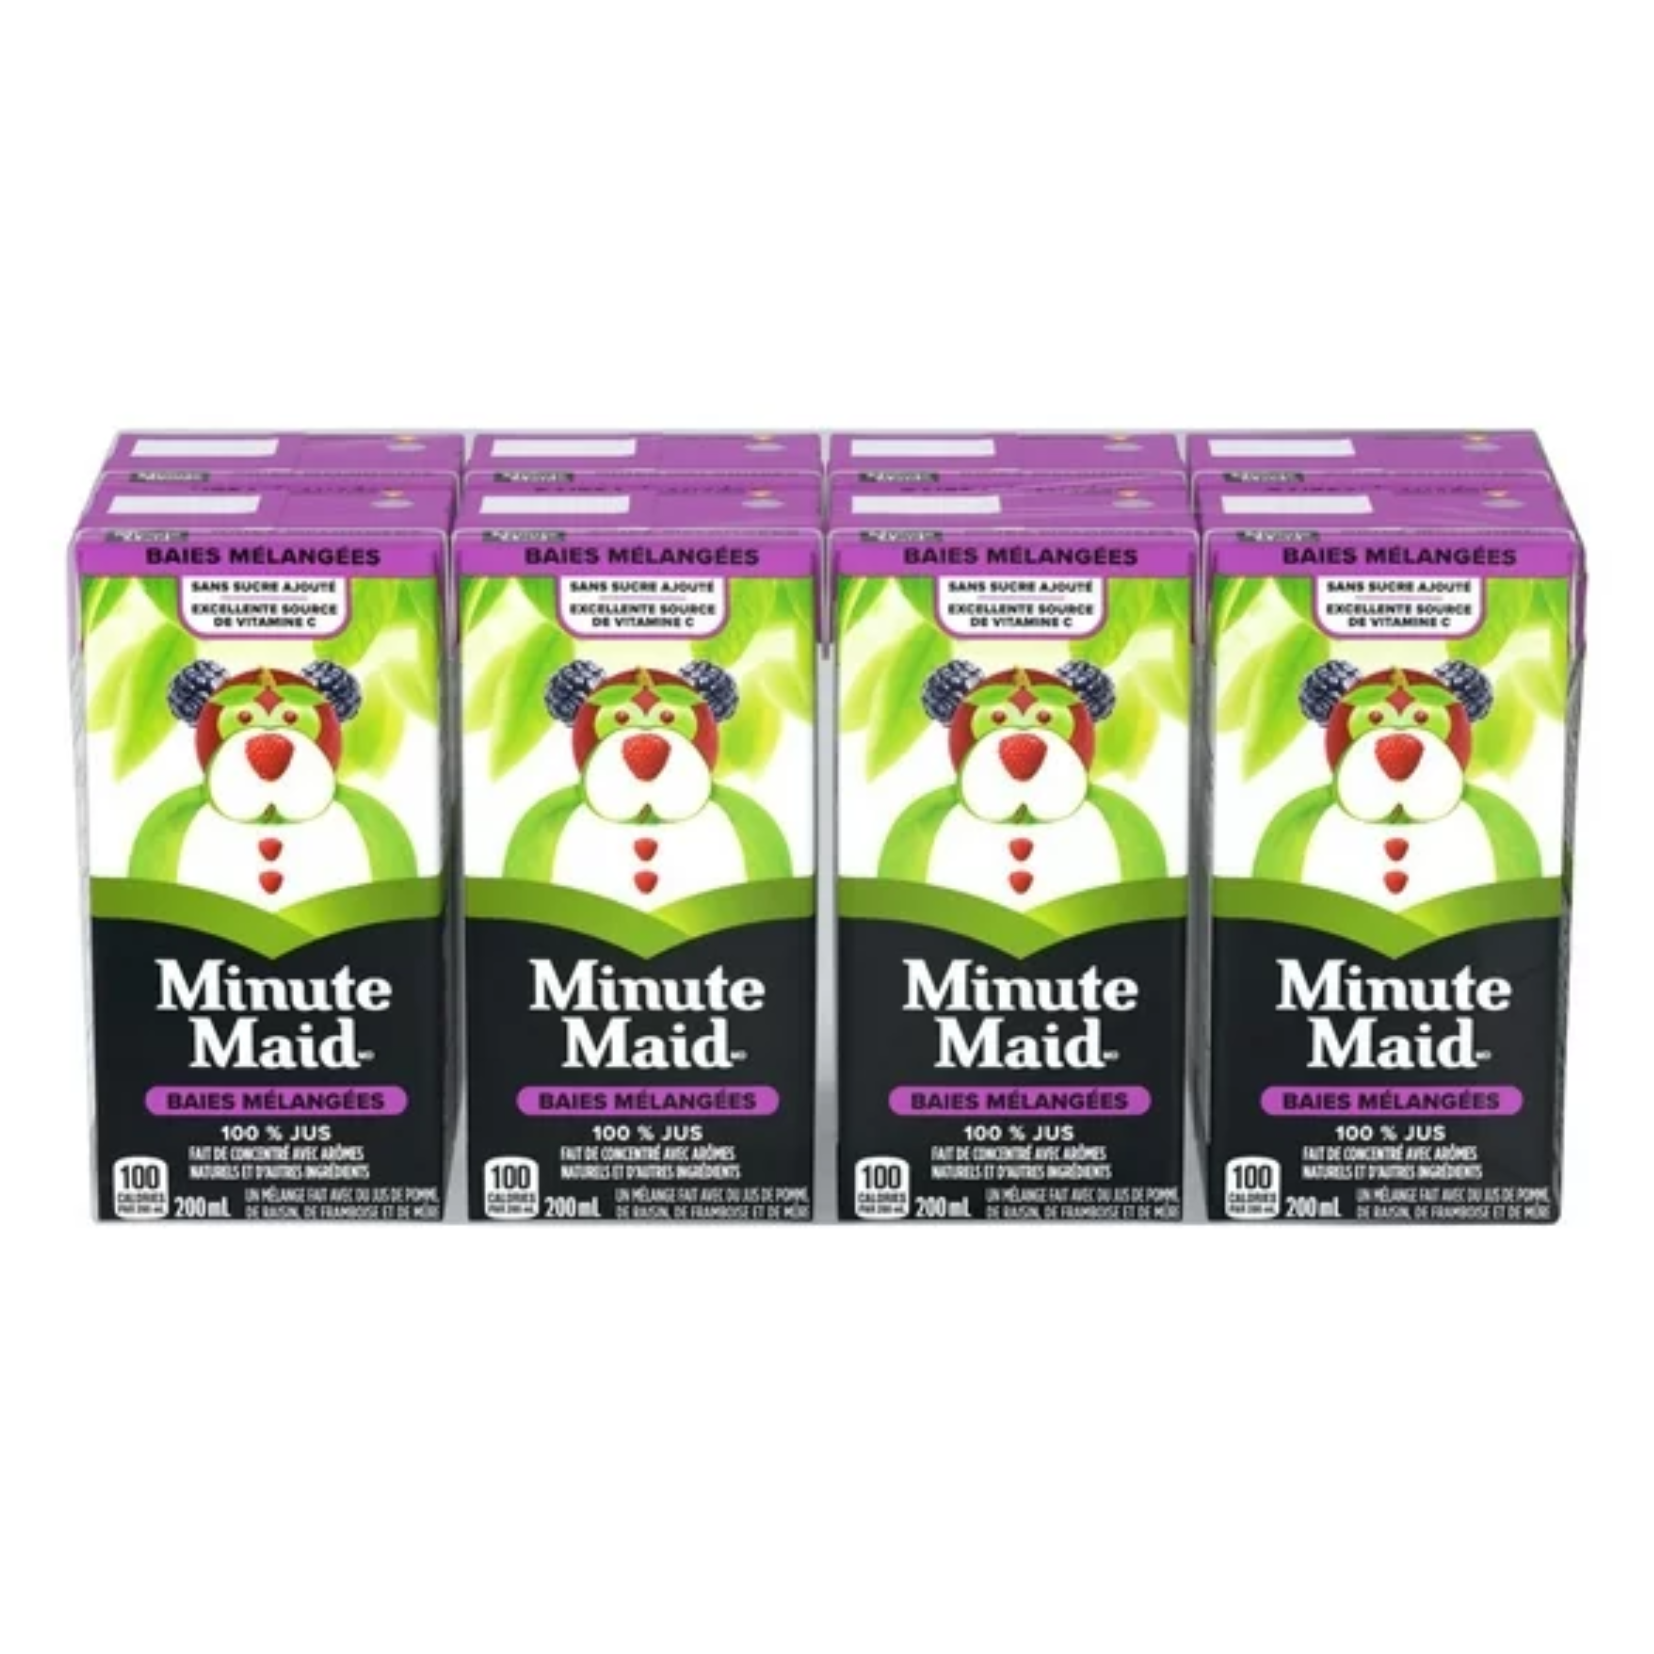 Minute Maid Mixed Berry Juice Boxes 200ml x 8